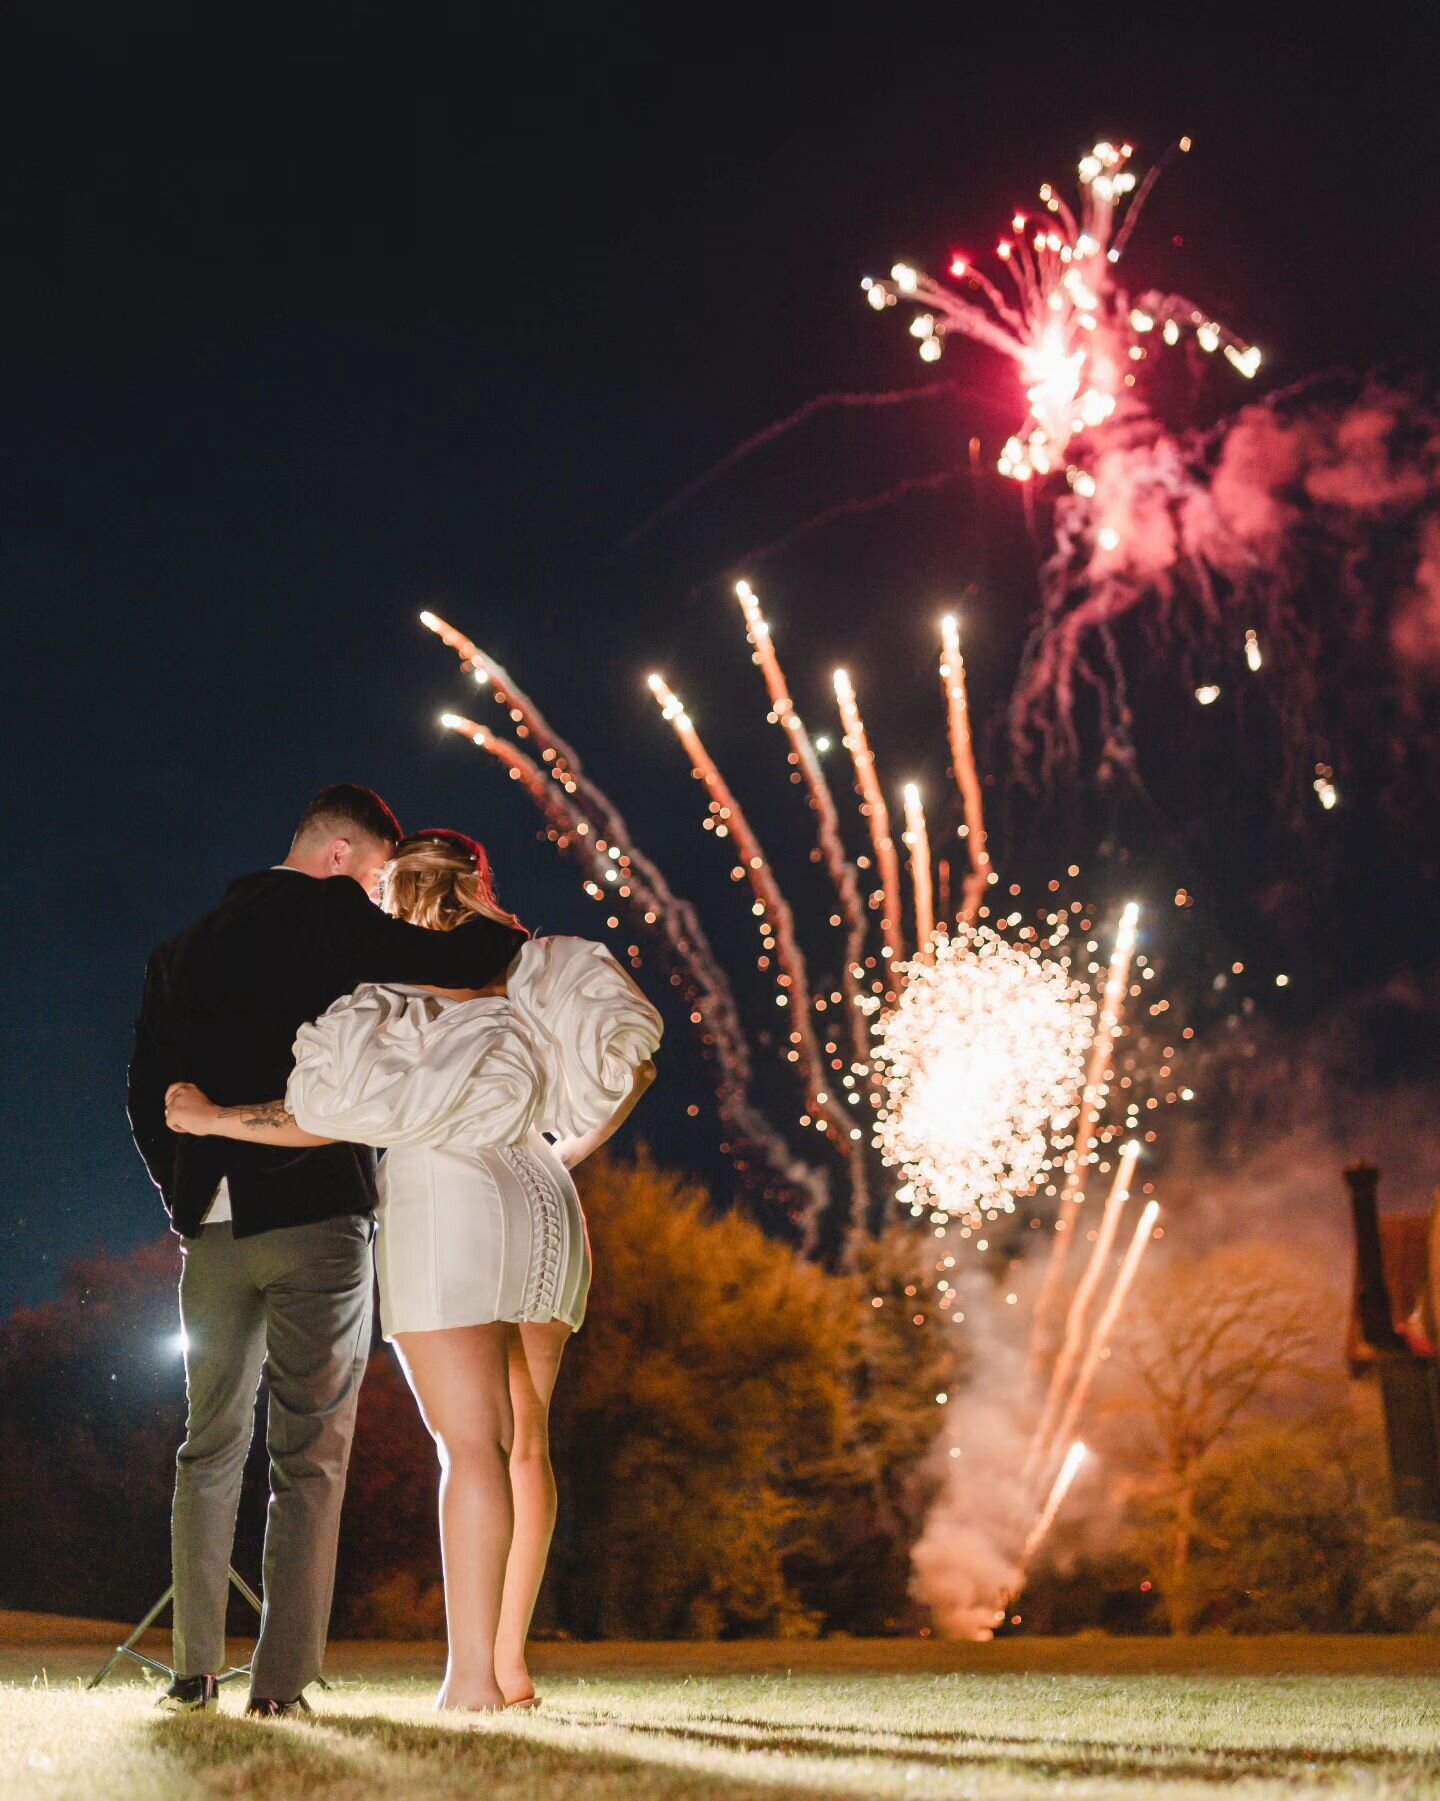 The best ways to end such an incredible day 🤩🎆🎇

Venue - @farnhamcastleweddings 

#weddingphotography #weddingphotographer #photographer #weddingideas 
#wedding #surreyweddingphotographer #bridetobe #engageduk #surreyweddingvideographer #weddingvi